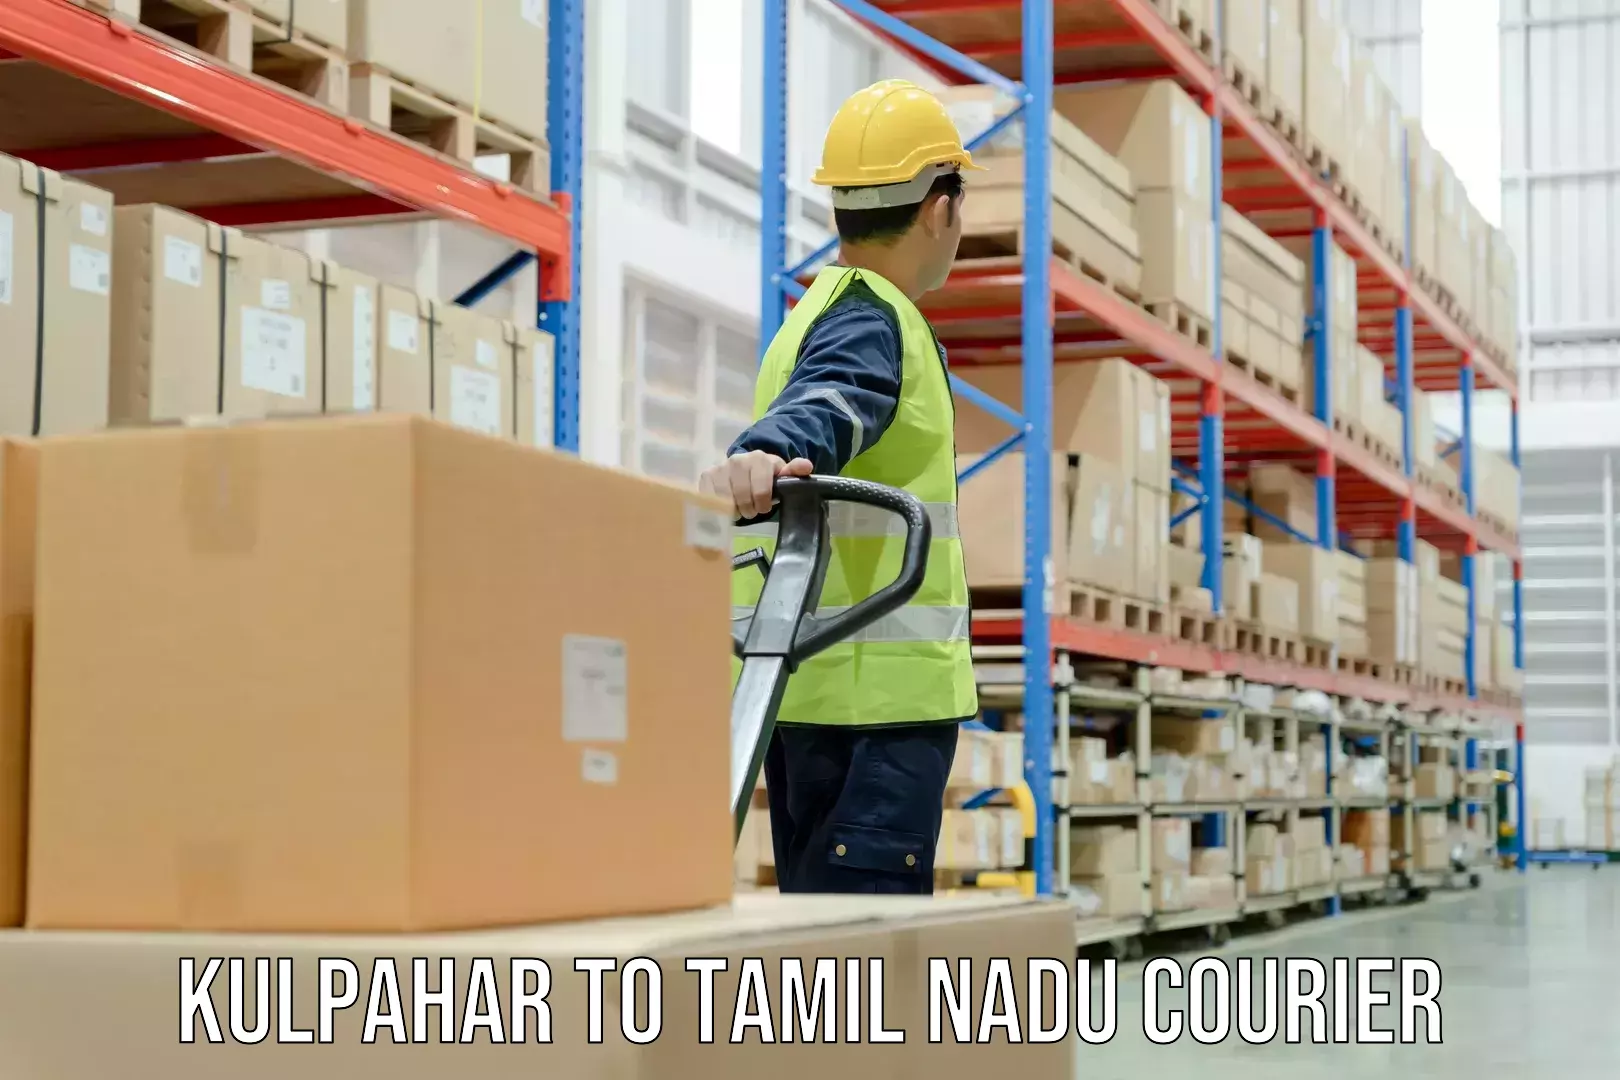 Courier services Kulpahar to Ennore Port Chennai